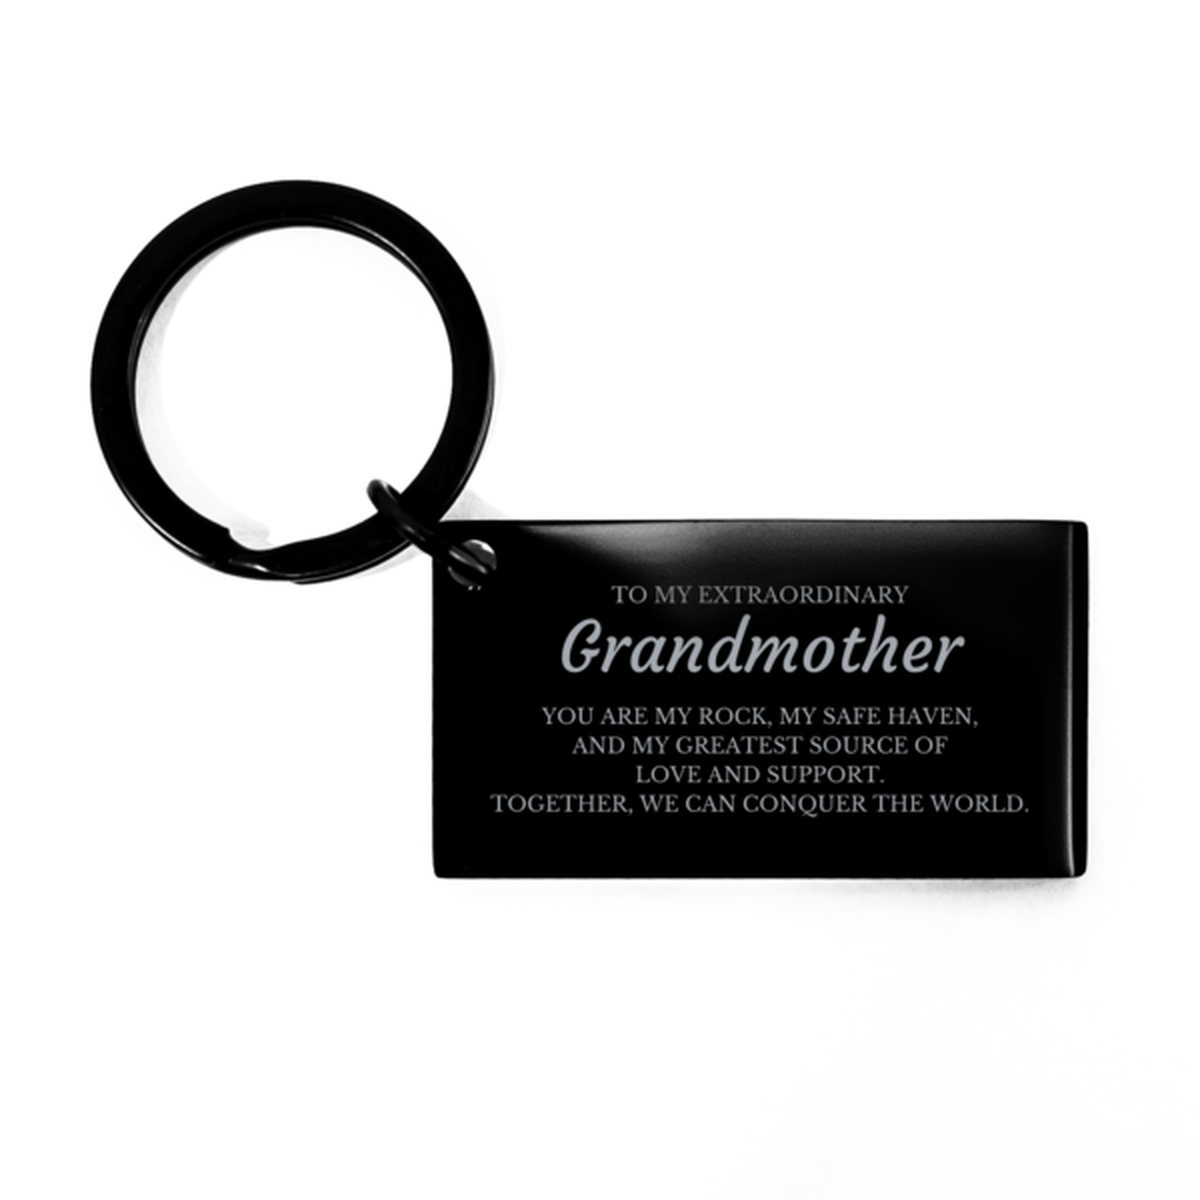 To My Extraordinary Grandmother Gifts, Together, we can conquer the world, Birthday Keychain For Grandmother, Christmas Gifts For Grandmother